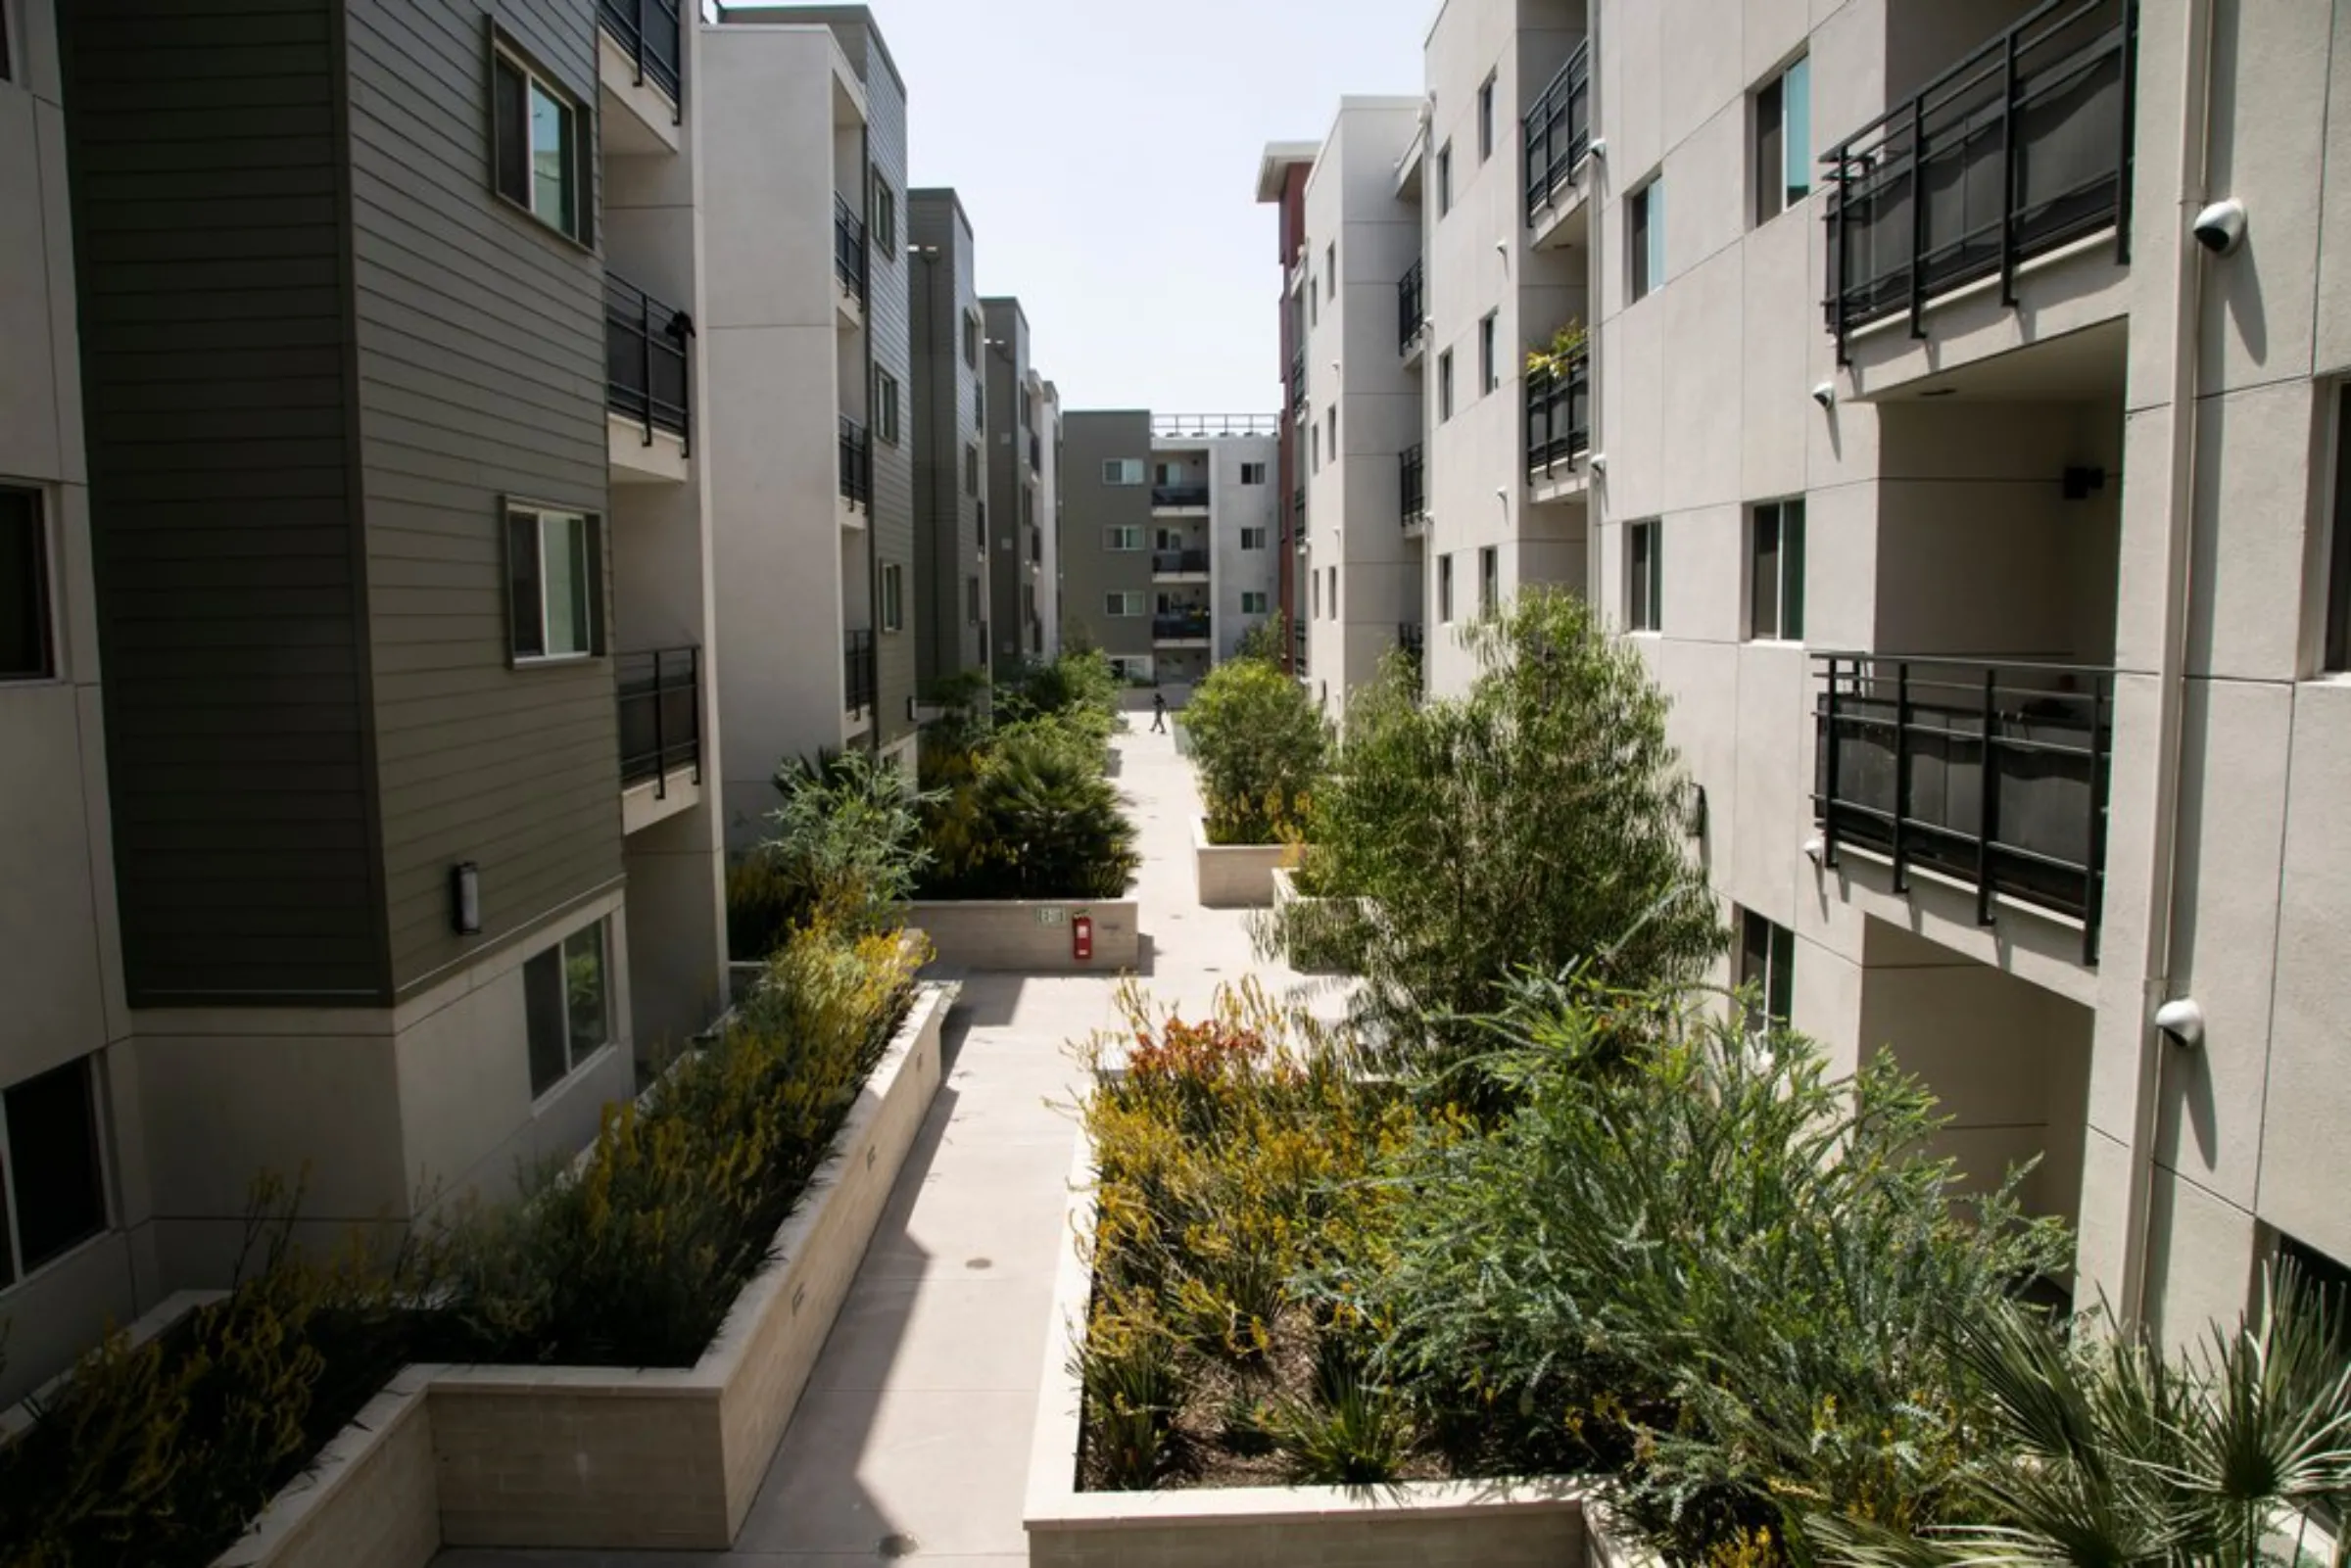 A view of an affordable housing residential development financed with state funds from a carbon tax and built next to a train station in Los Angeles, May 19, 2021